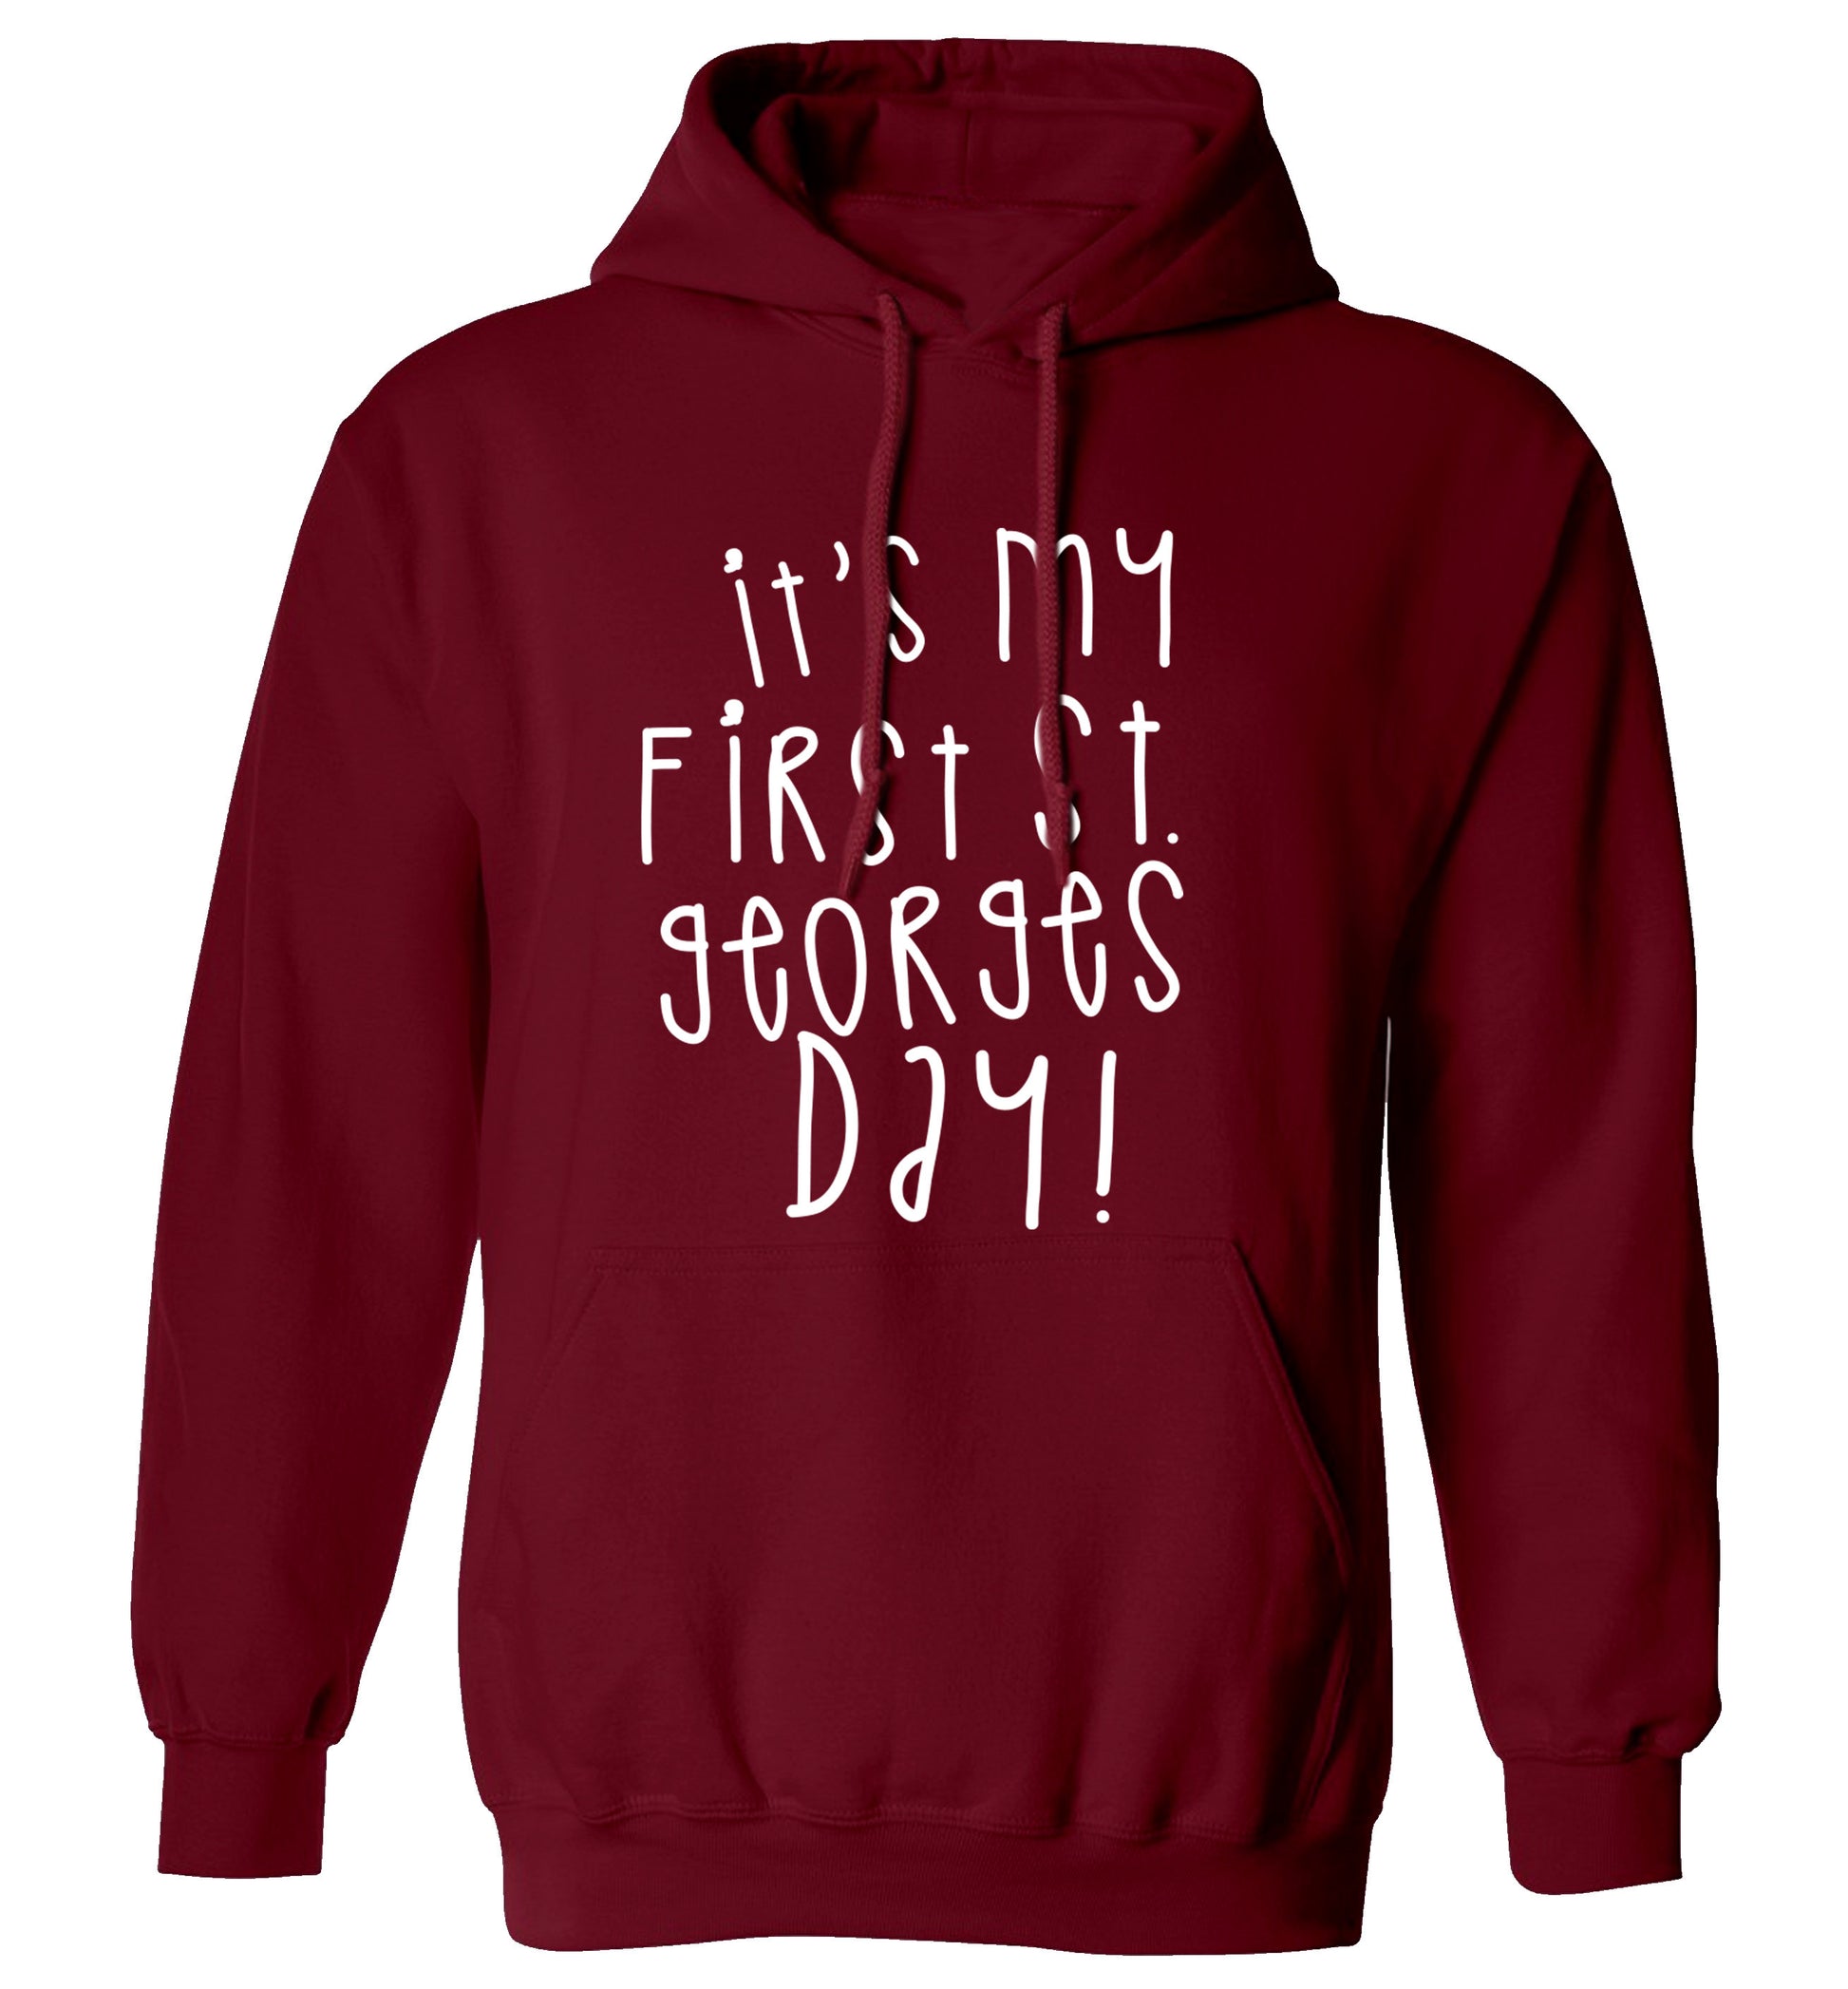 It's my first St Georges day adults unisex maroon hoodie 2XL